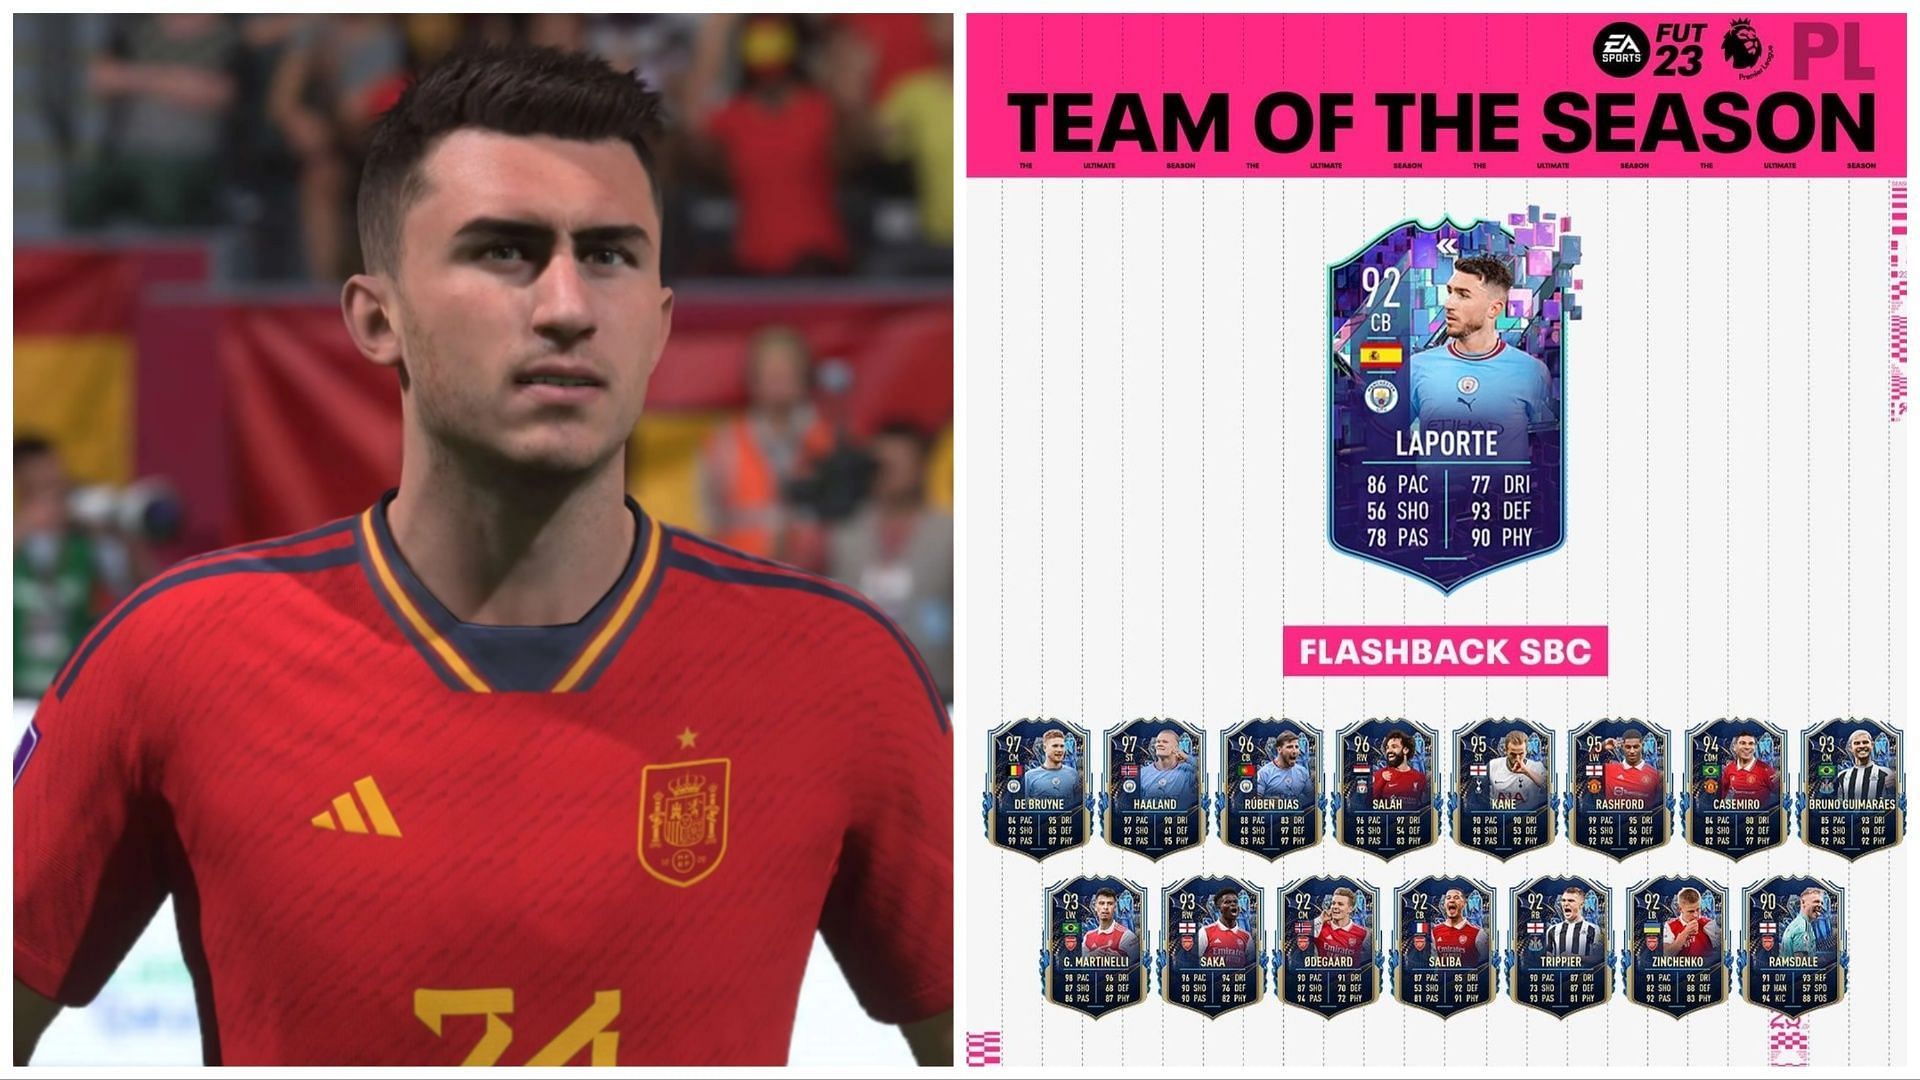 TOTS Laporte is now available in FIFA 23 (Images via EA Sports)